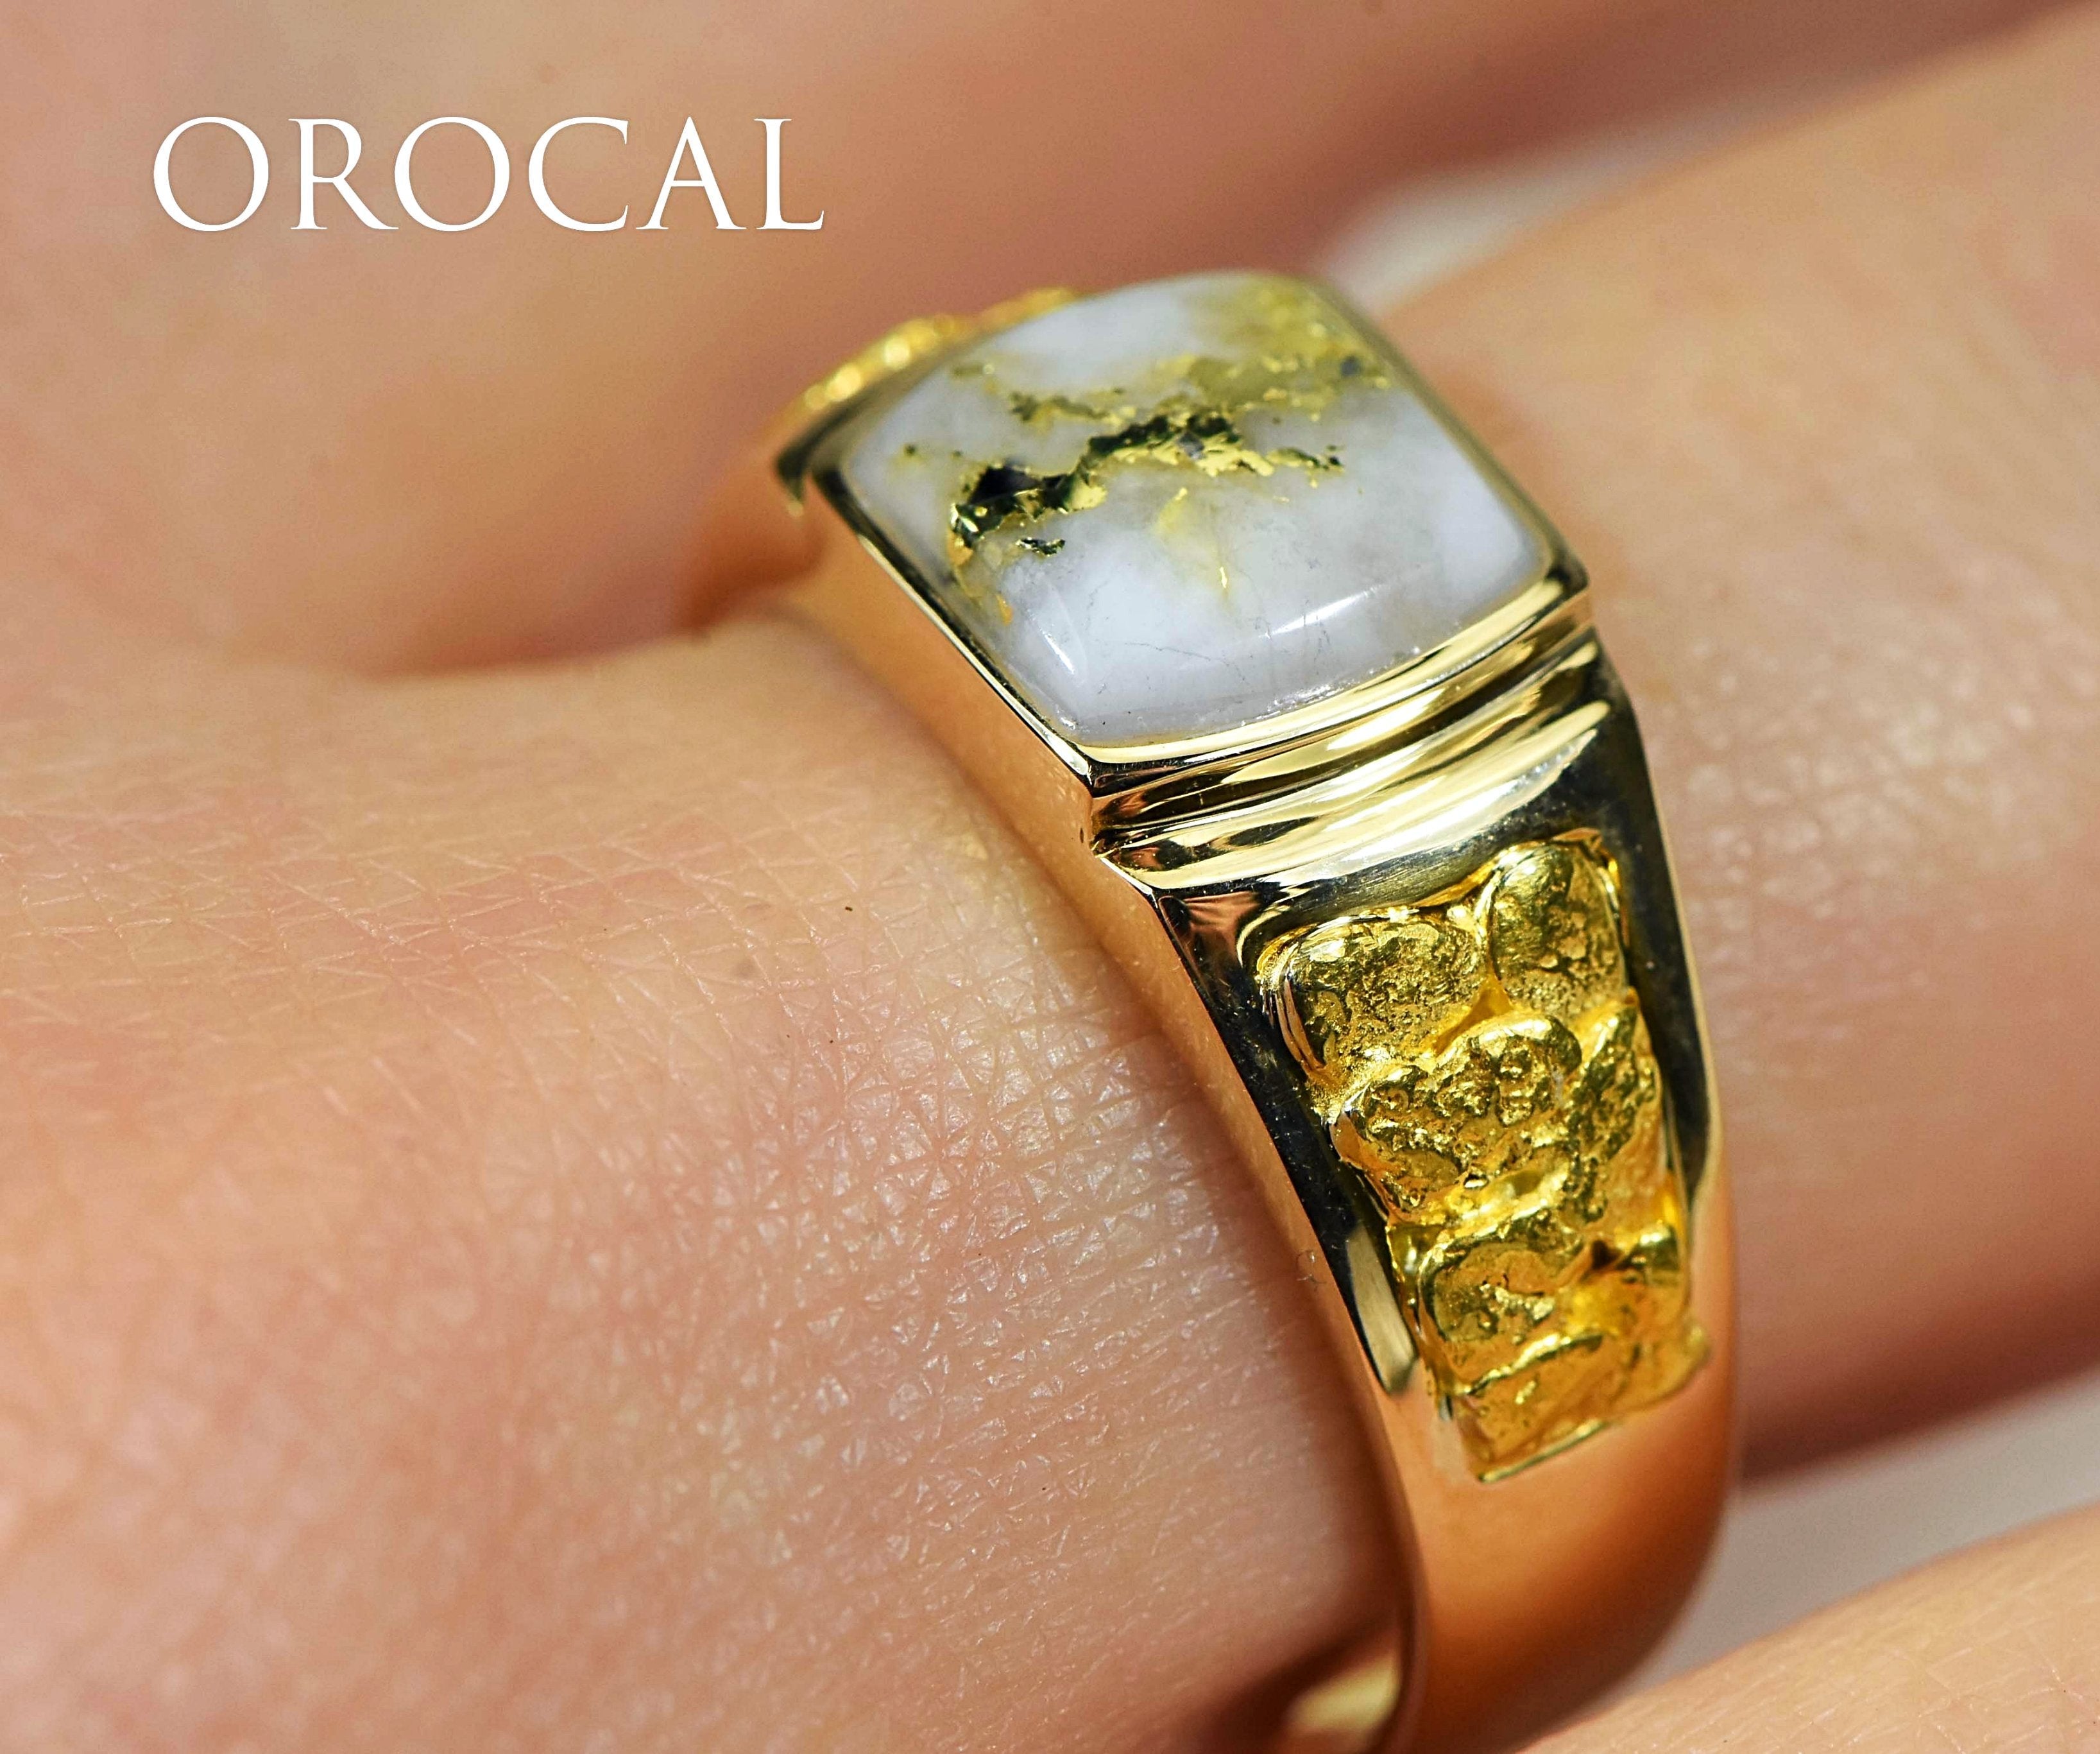 Gold Quartz Ring "Orocal" RLL1075NQ Genuine Hand Crafted Jewelry - 14K Gold Casting